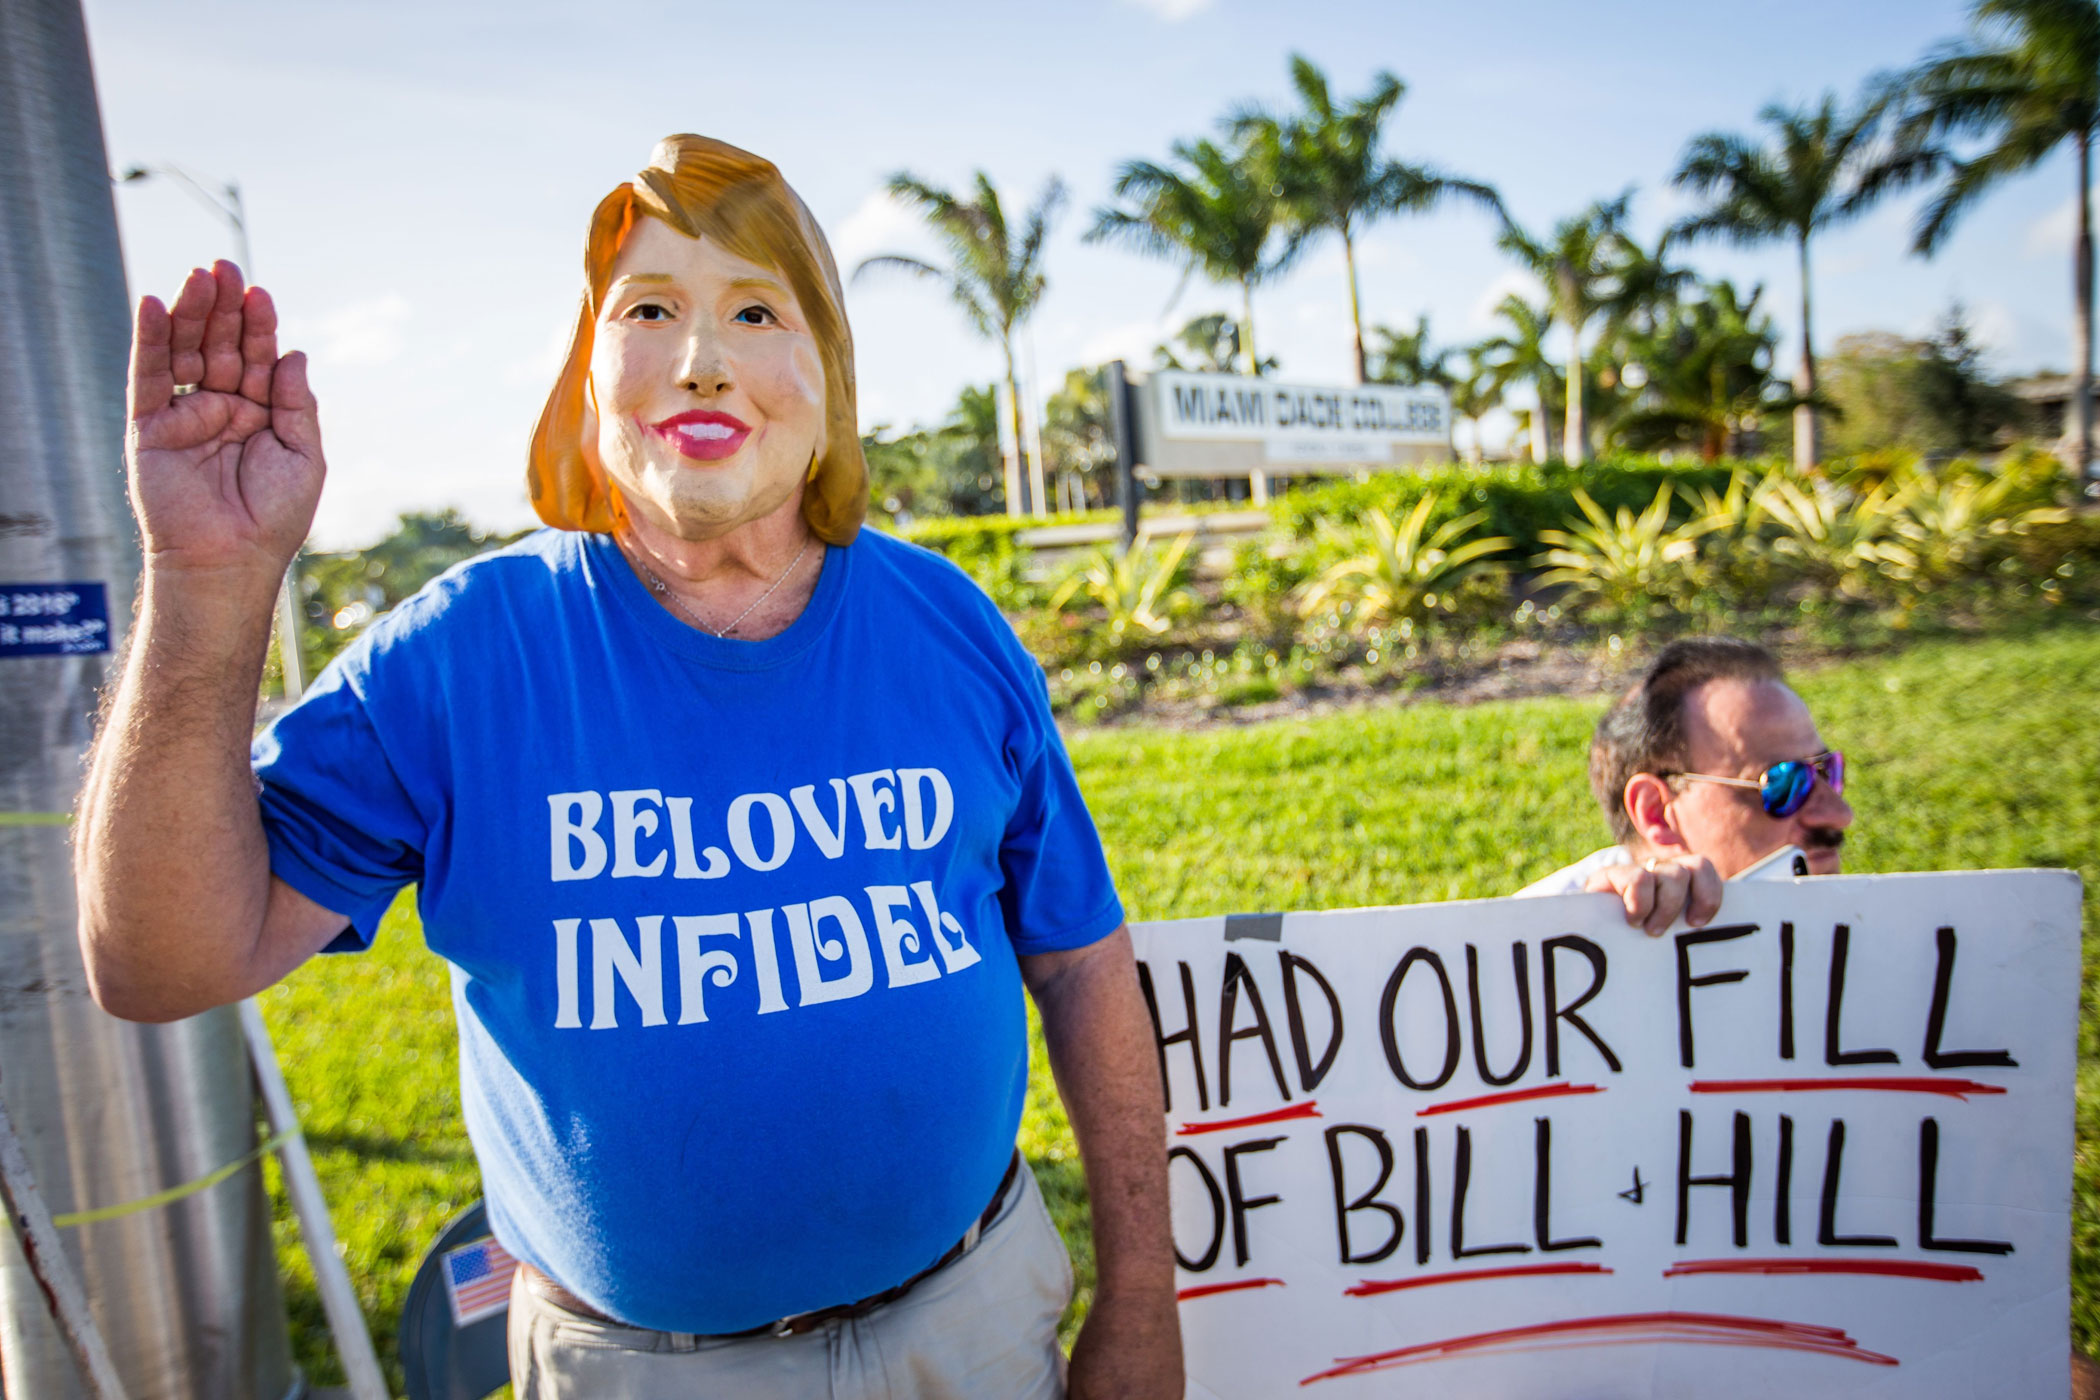 People gather outside before a debate between Democratic presidential candidates Hillary Clinton and Bernie Sanders in Kendall, Fla. on March 9.